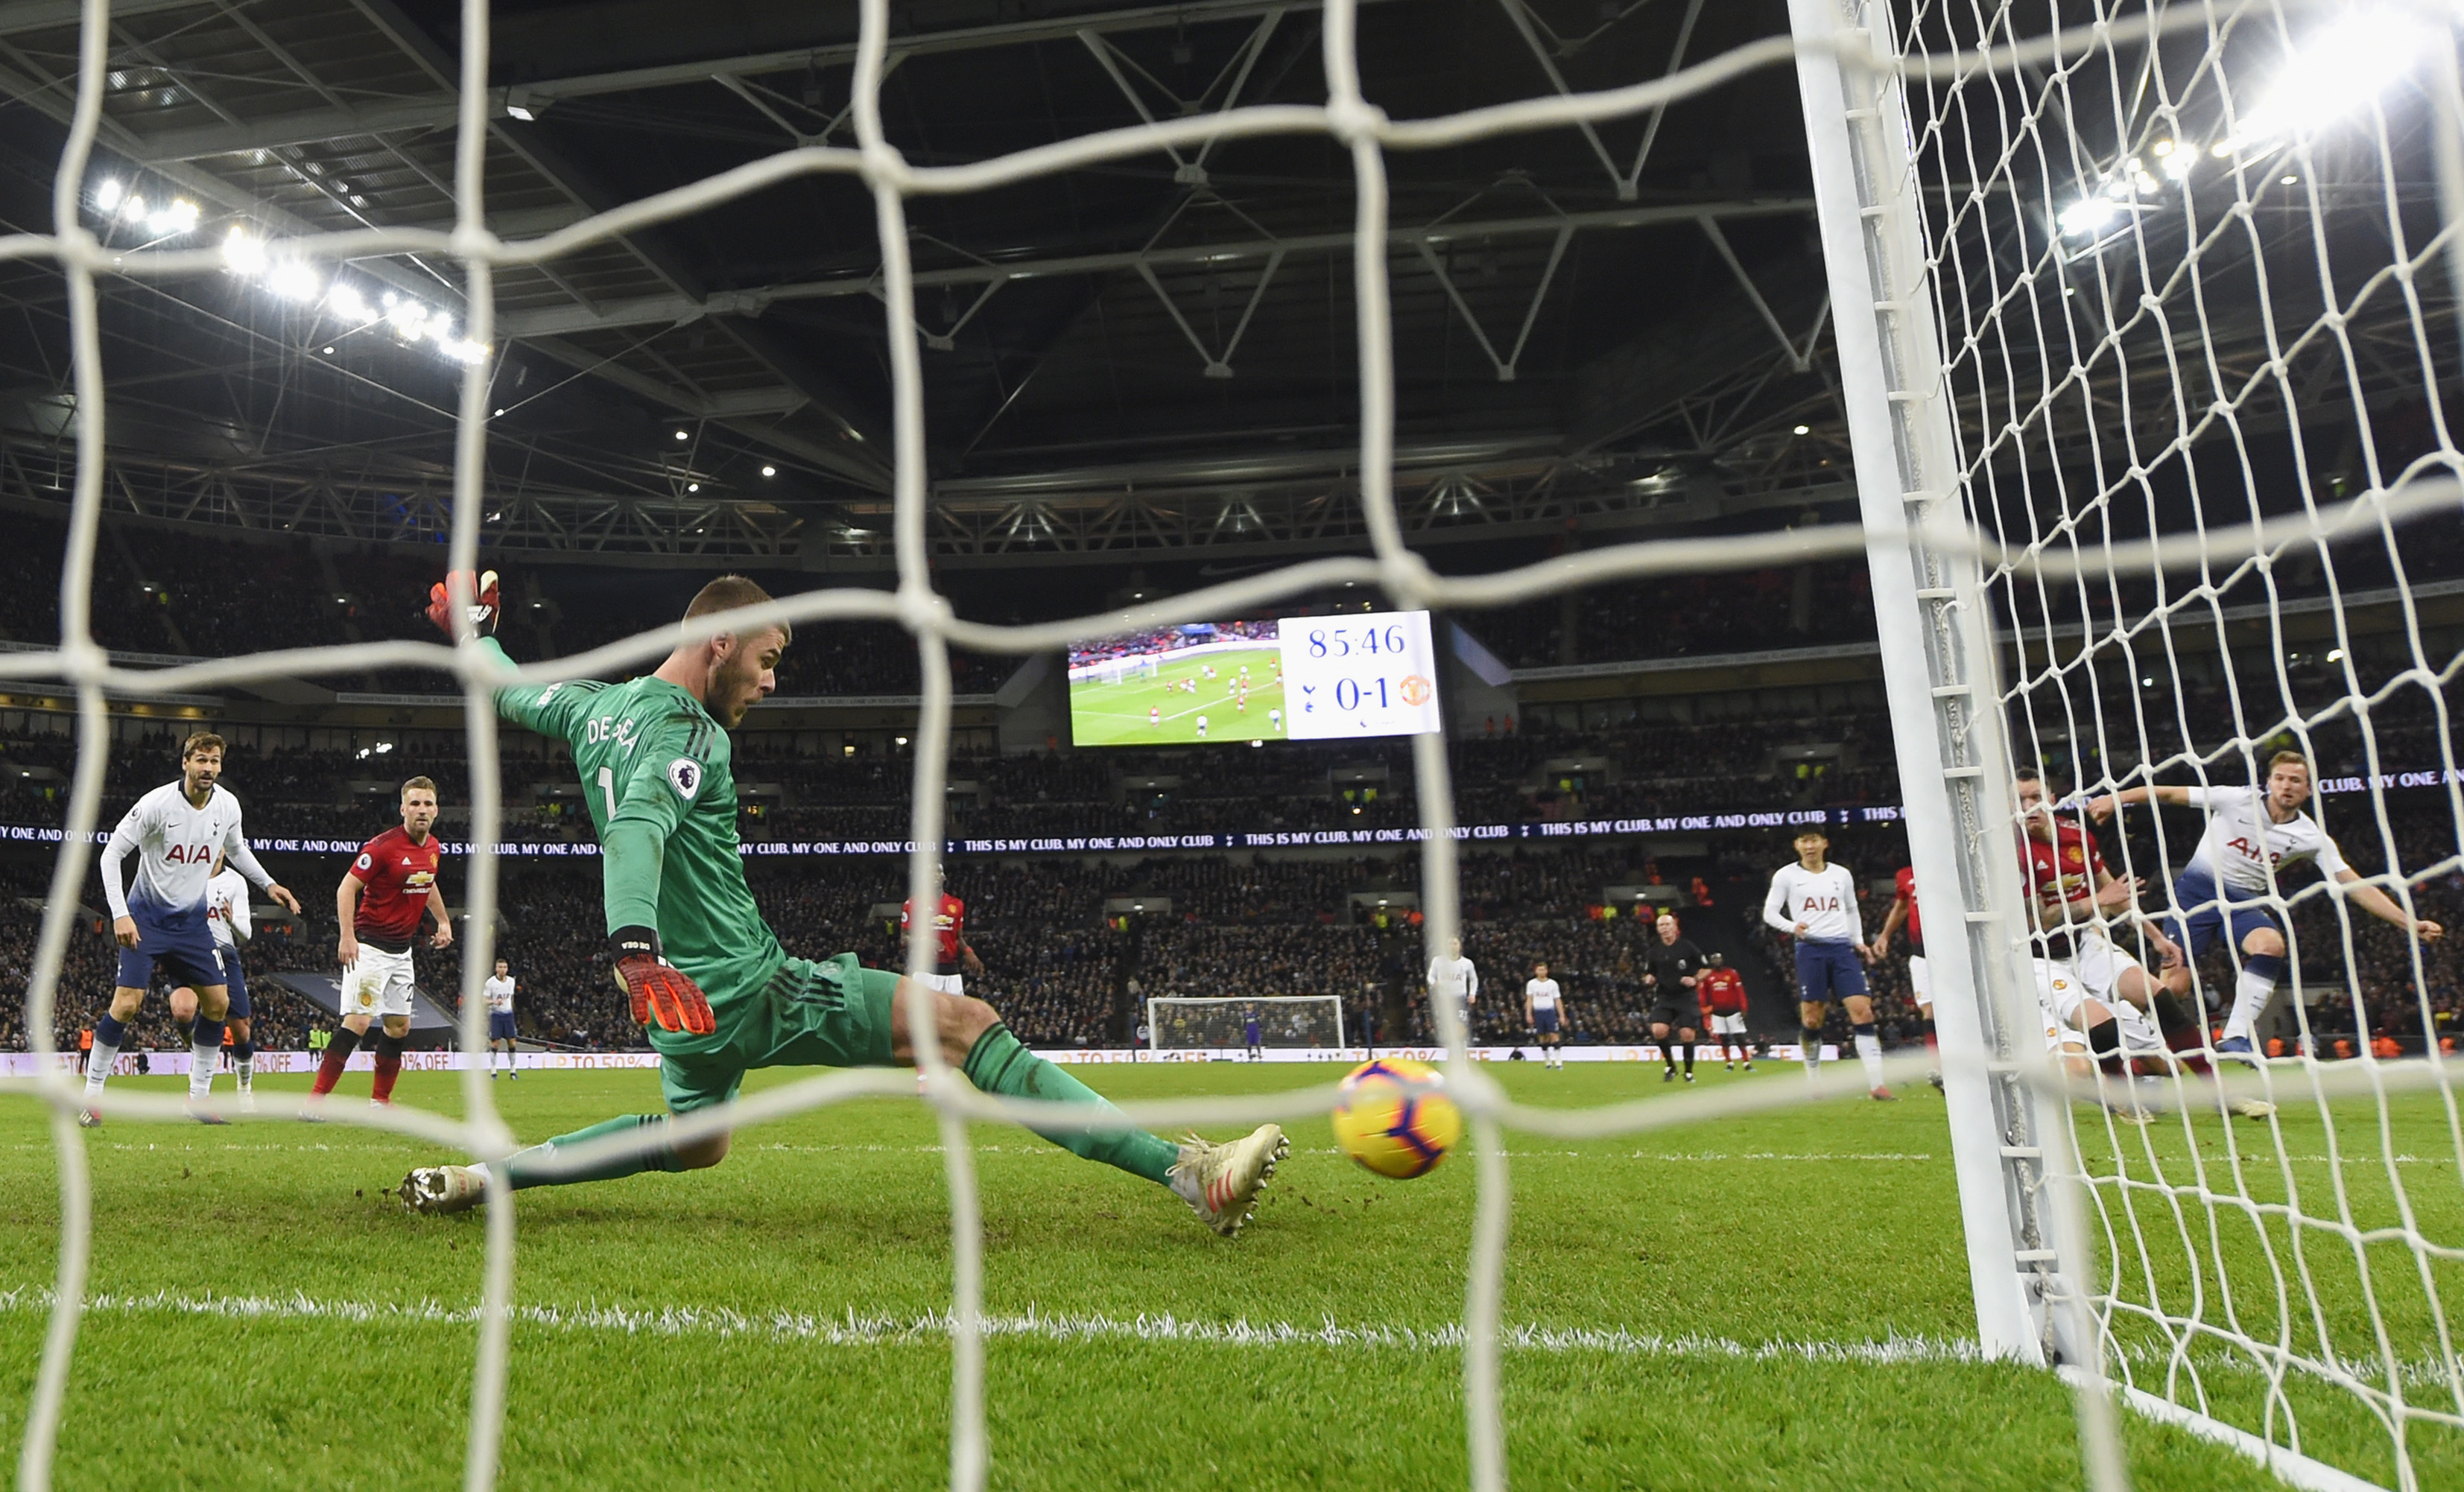 LONDON, ENGLAND - JANUARY 13: David De Gea of Manchester United makes a save from Harry Kane of Tottenham Hotspur (R) during the Premier League match between Tottenham Hotspur and Manchester United at Wembley Stadium on January 13, 2019 in London, United Kingdom. (Photo by Mike Hewitt/Getty Images)